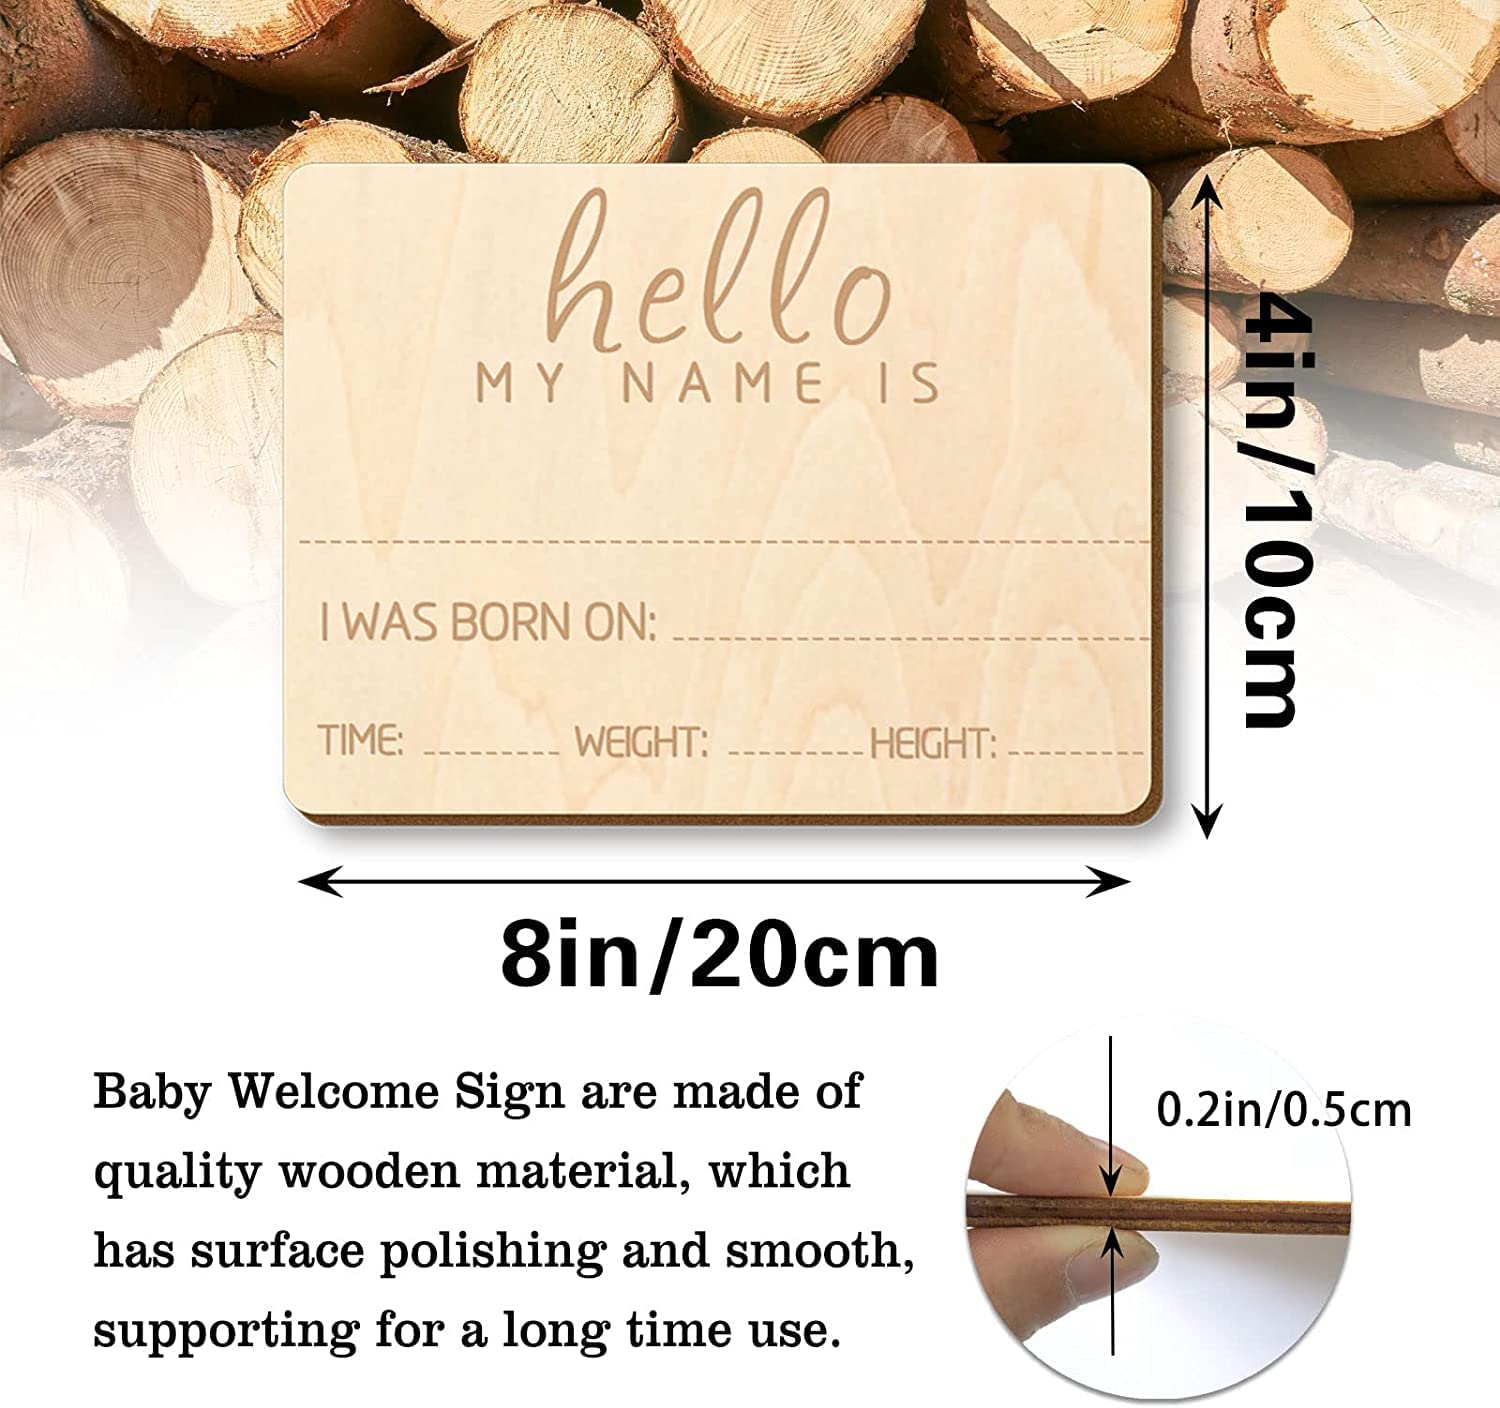 Birth announcement sign for the monthly stages of the baby - 20x10 Cm